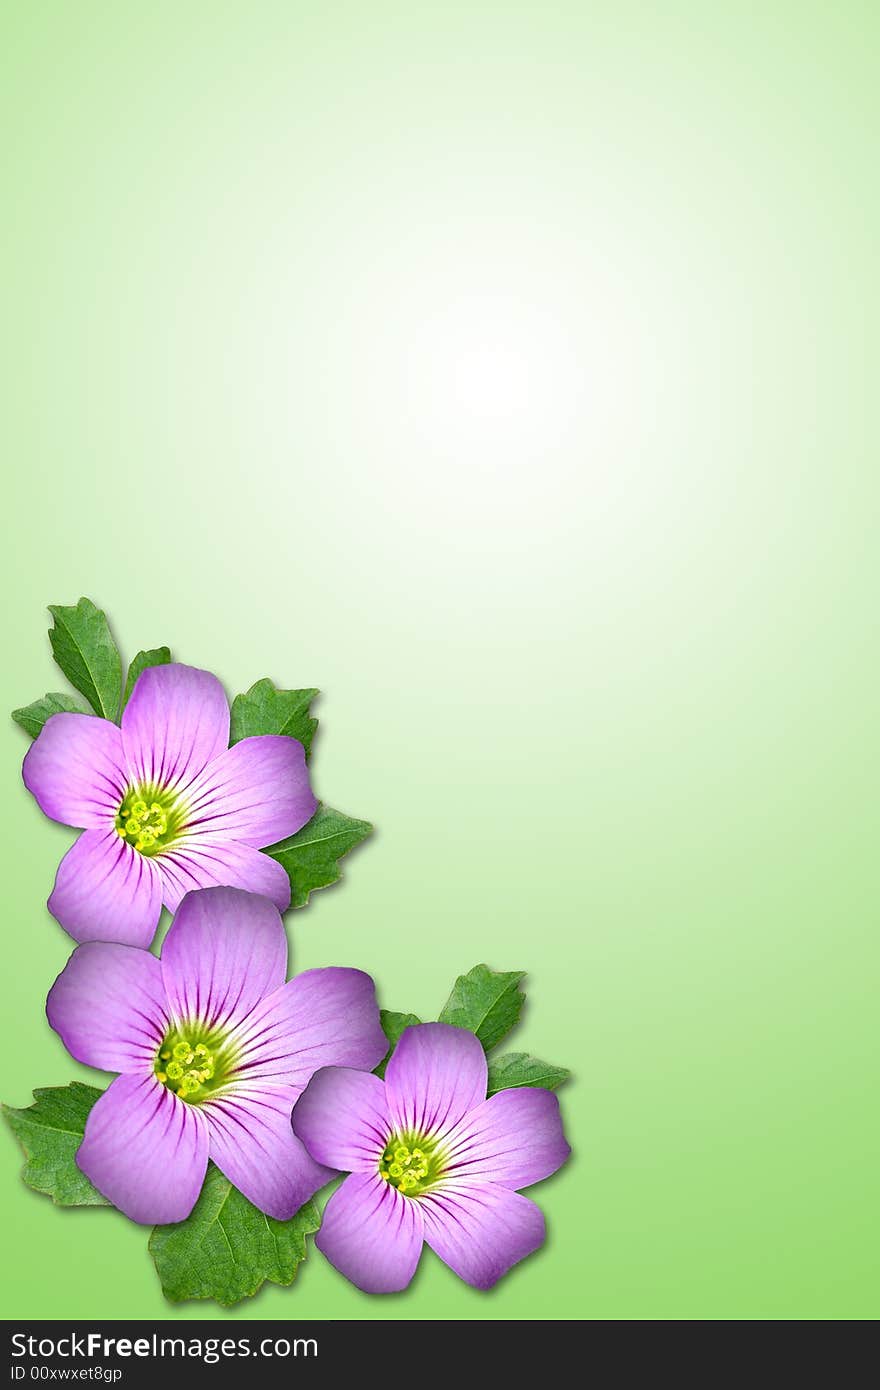 Composite of Purple flower and leaf with green background